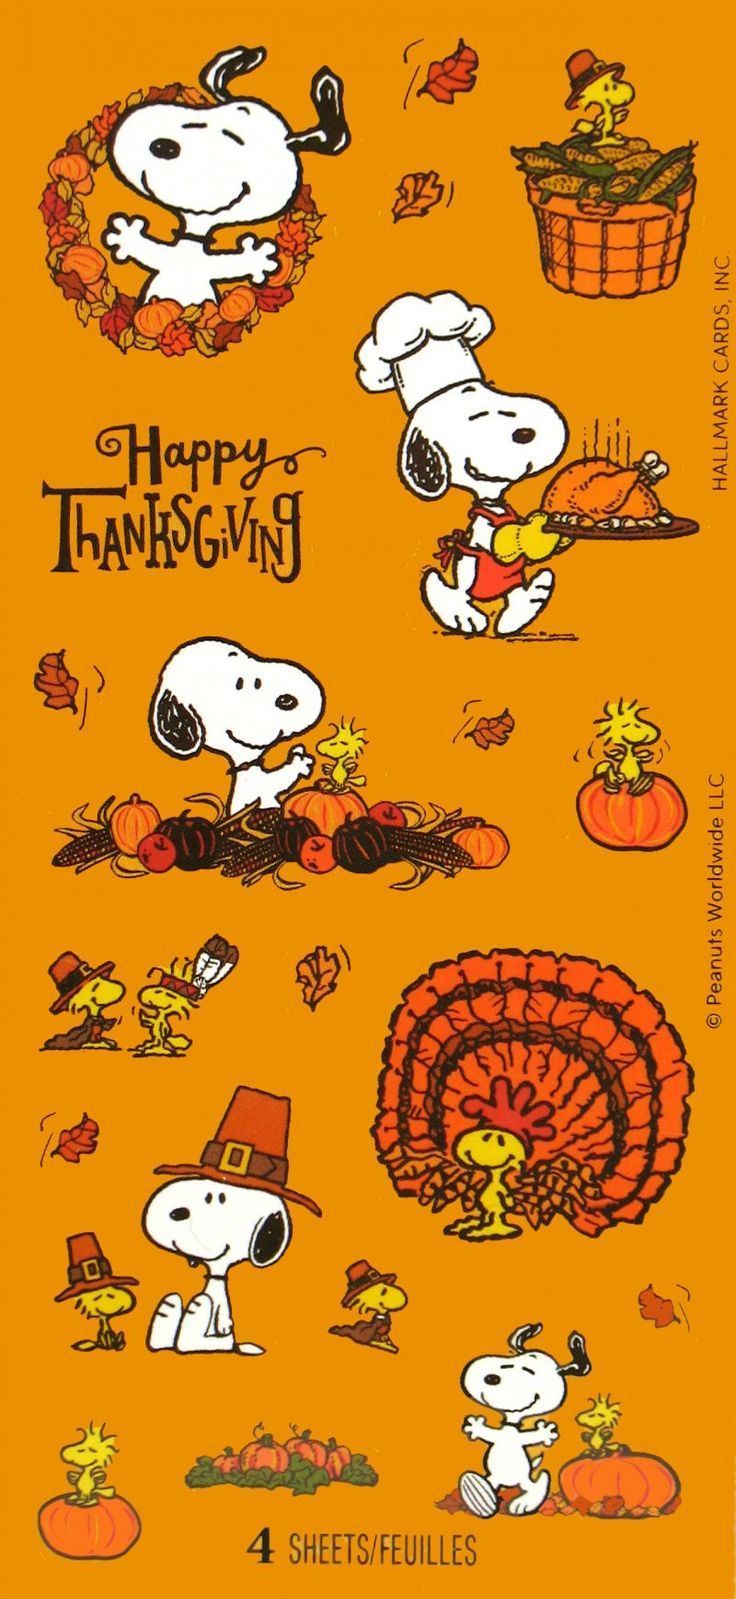 Snoopy Fall Wallpaper. Snoopy wallpaper, Snoopy halloween, Thanksgiving snoopy